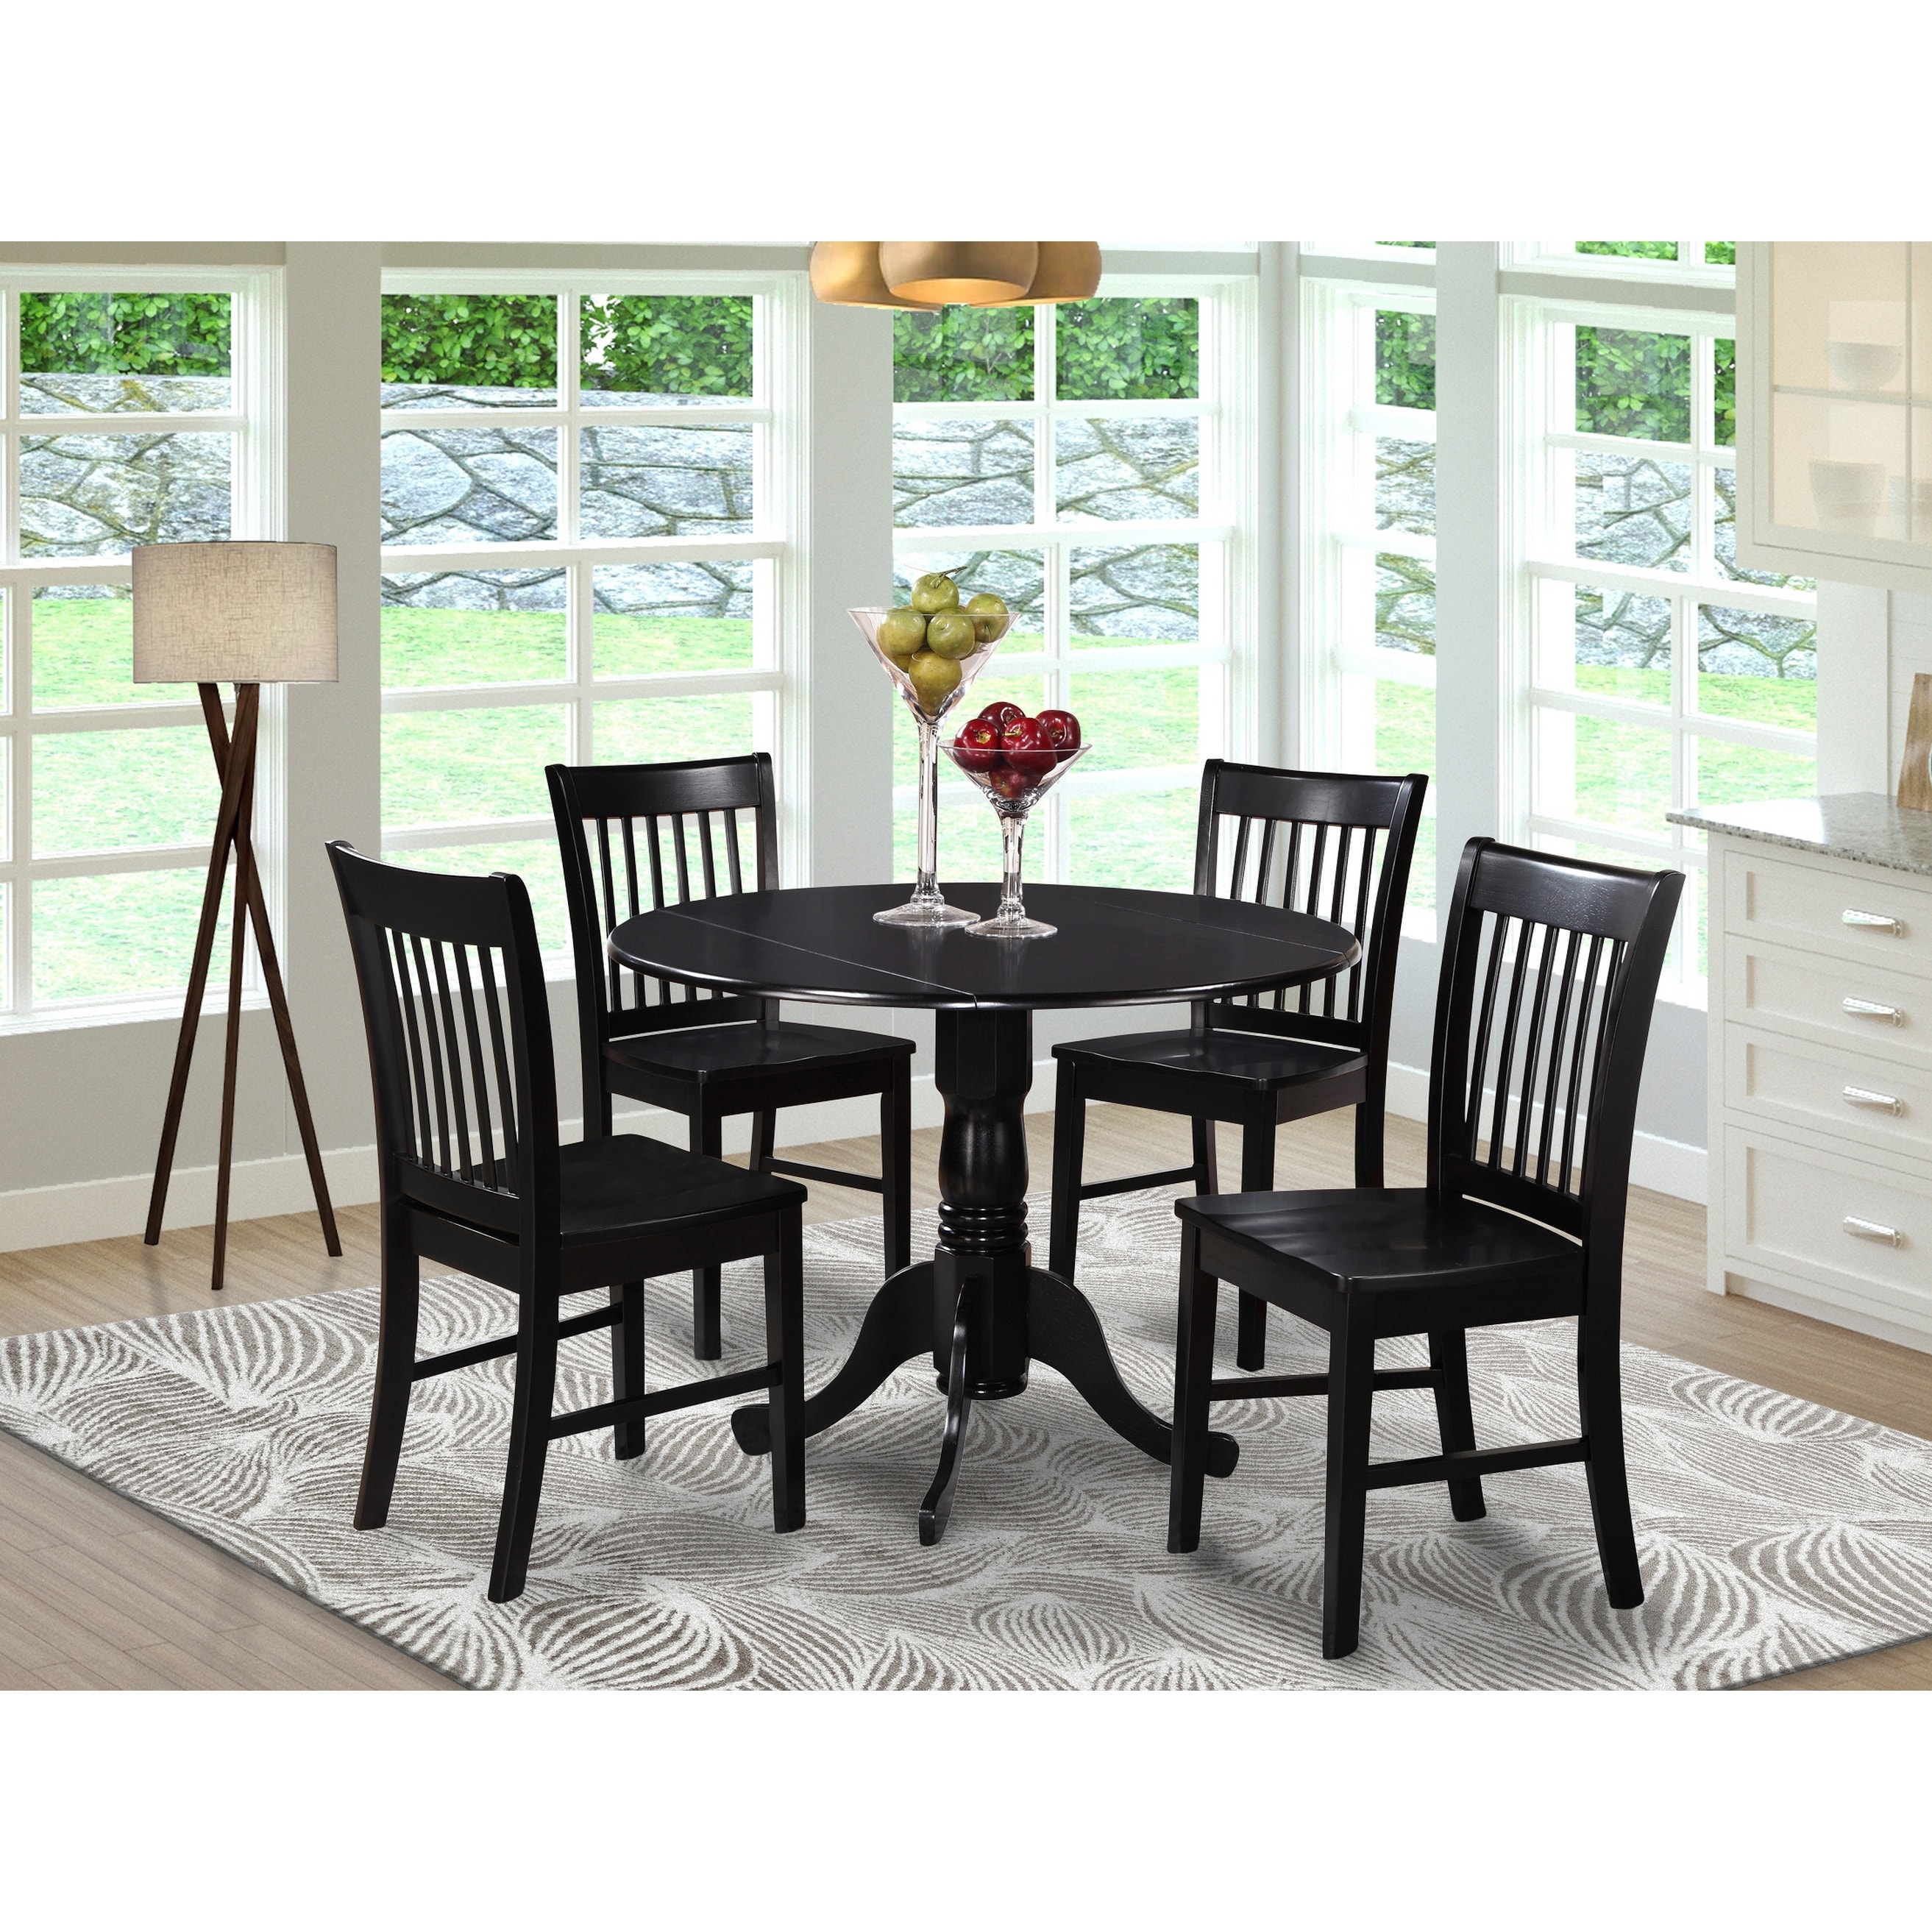 Black Round Kitchen Table And 4 Dinette Chairs 5 Piece Dining Set 